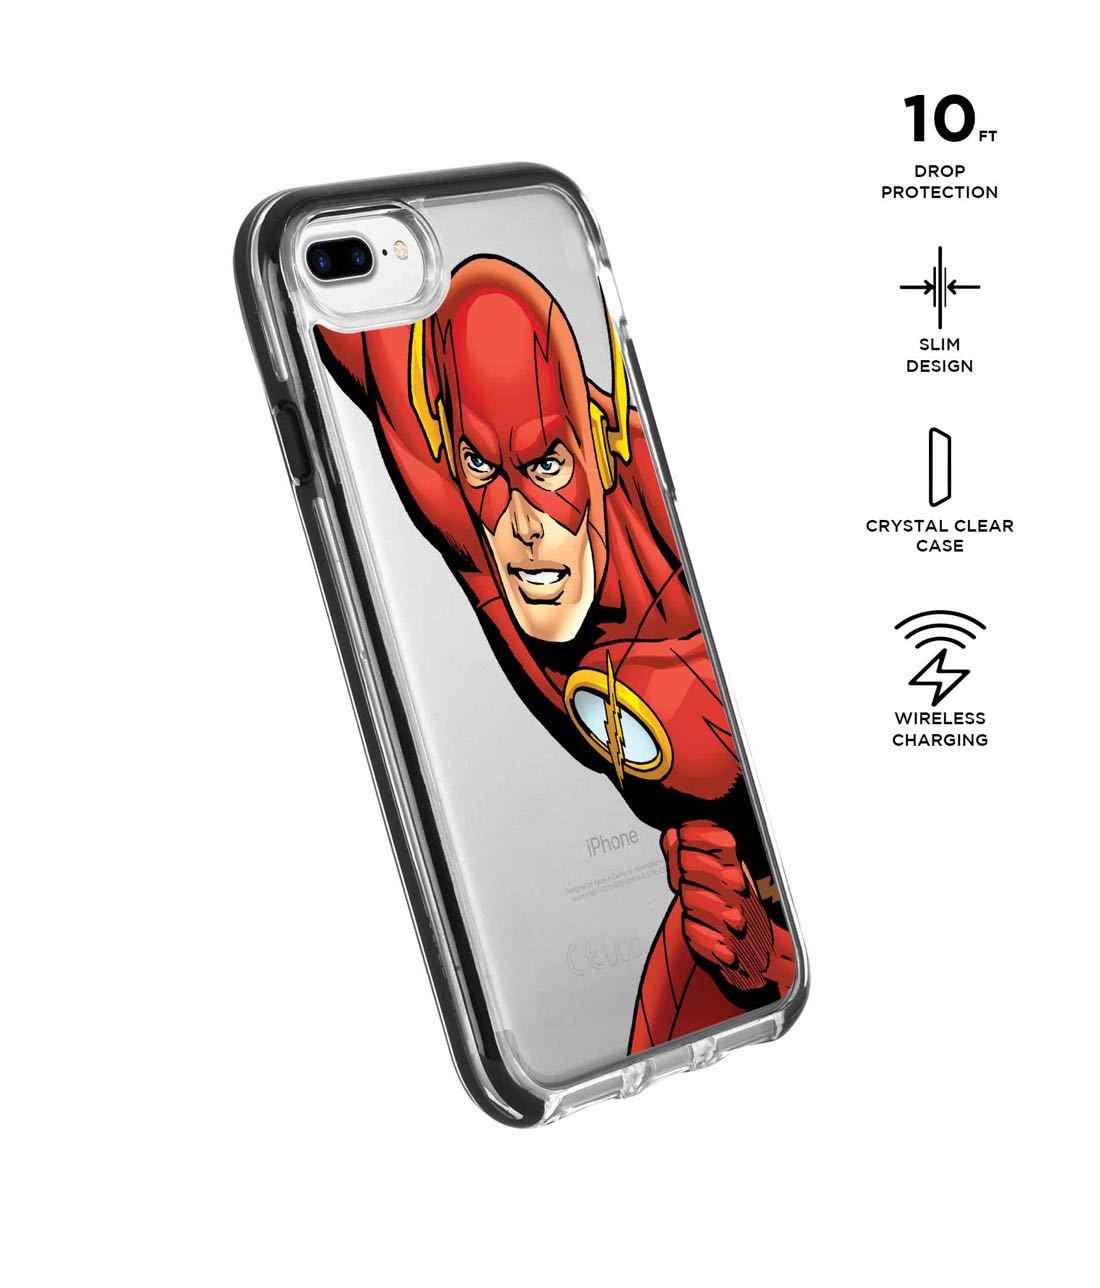 Fierce Flash - Extreme Phone Case for iPhone 7 Plus